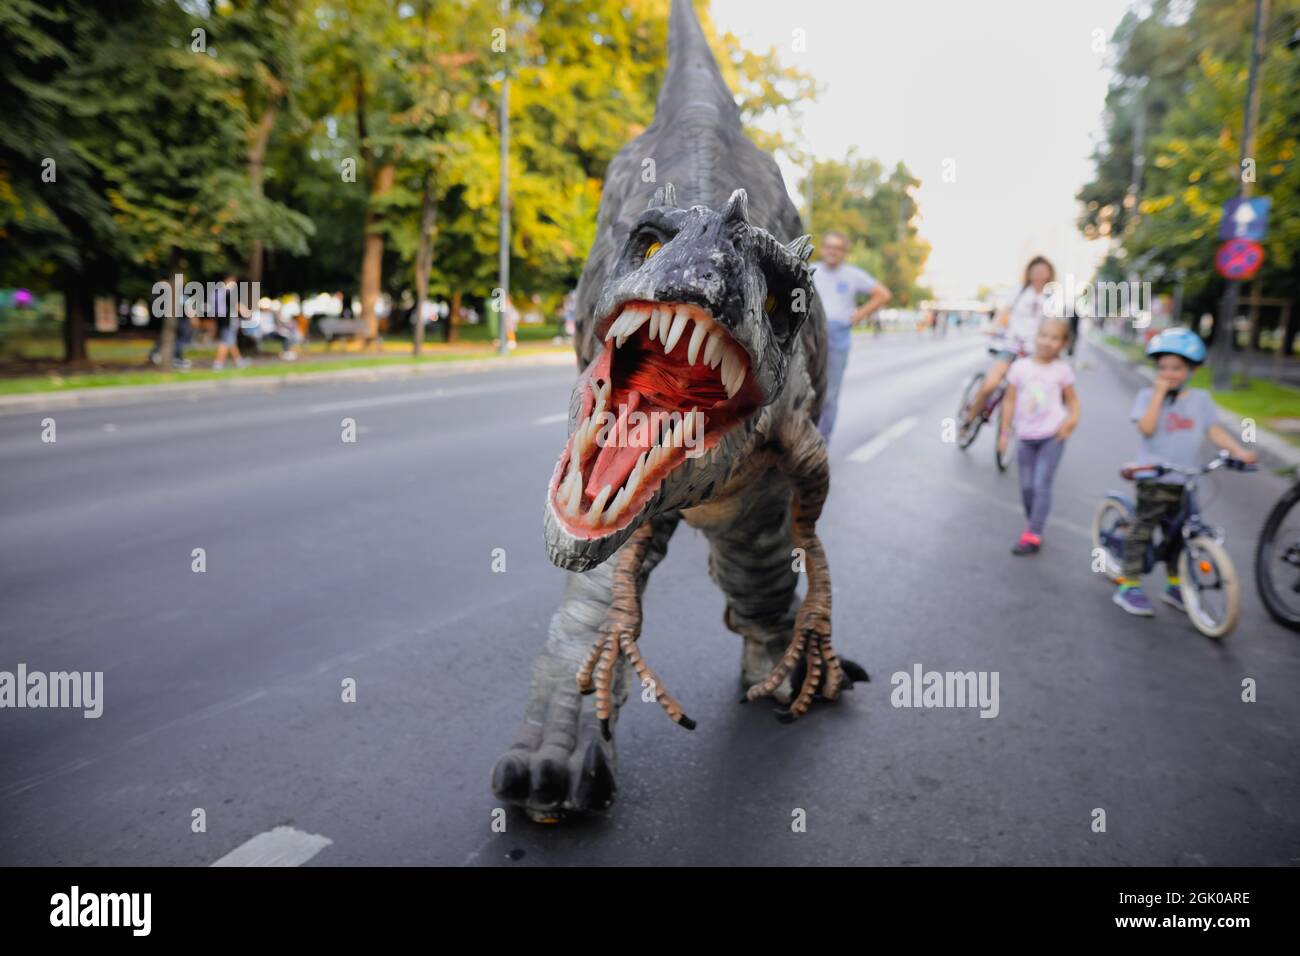 Bucharest, Romania - August 29, 2021: A man costumed as a carnivorous dinosaur walks between people and let’s them pet him during an outdoors event in Stock Photo